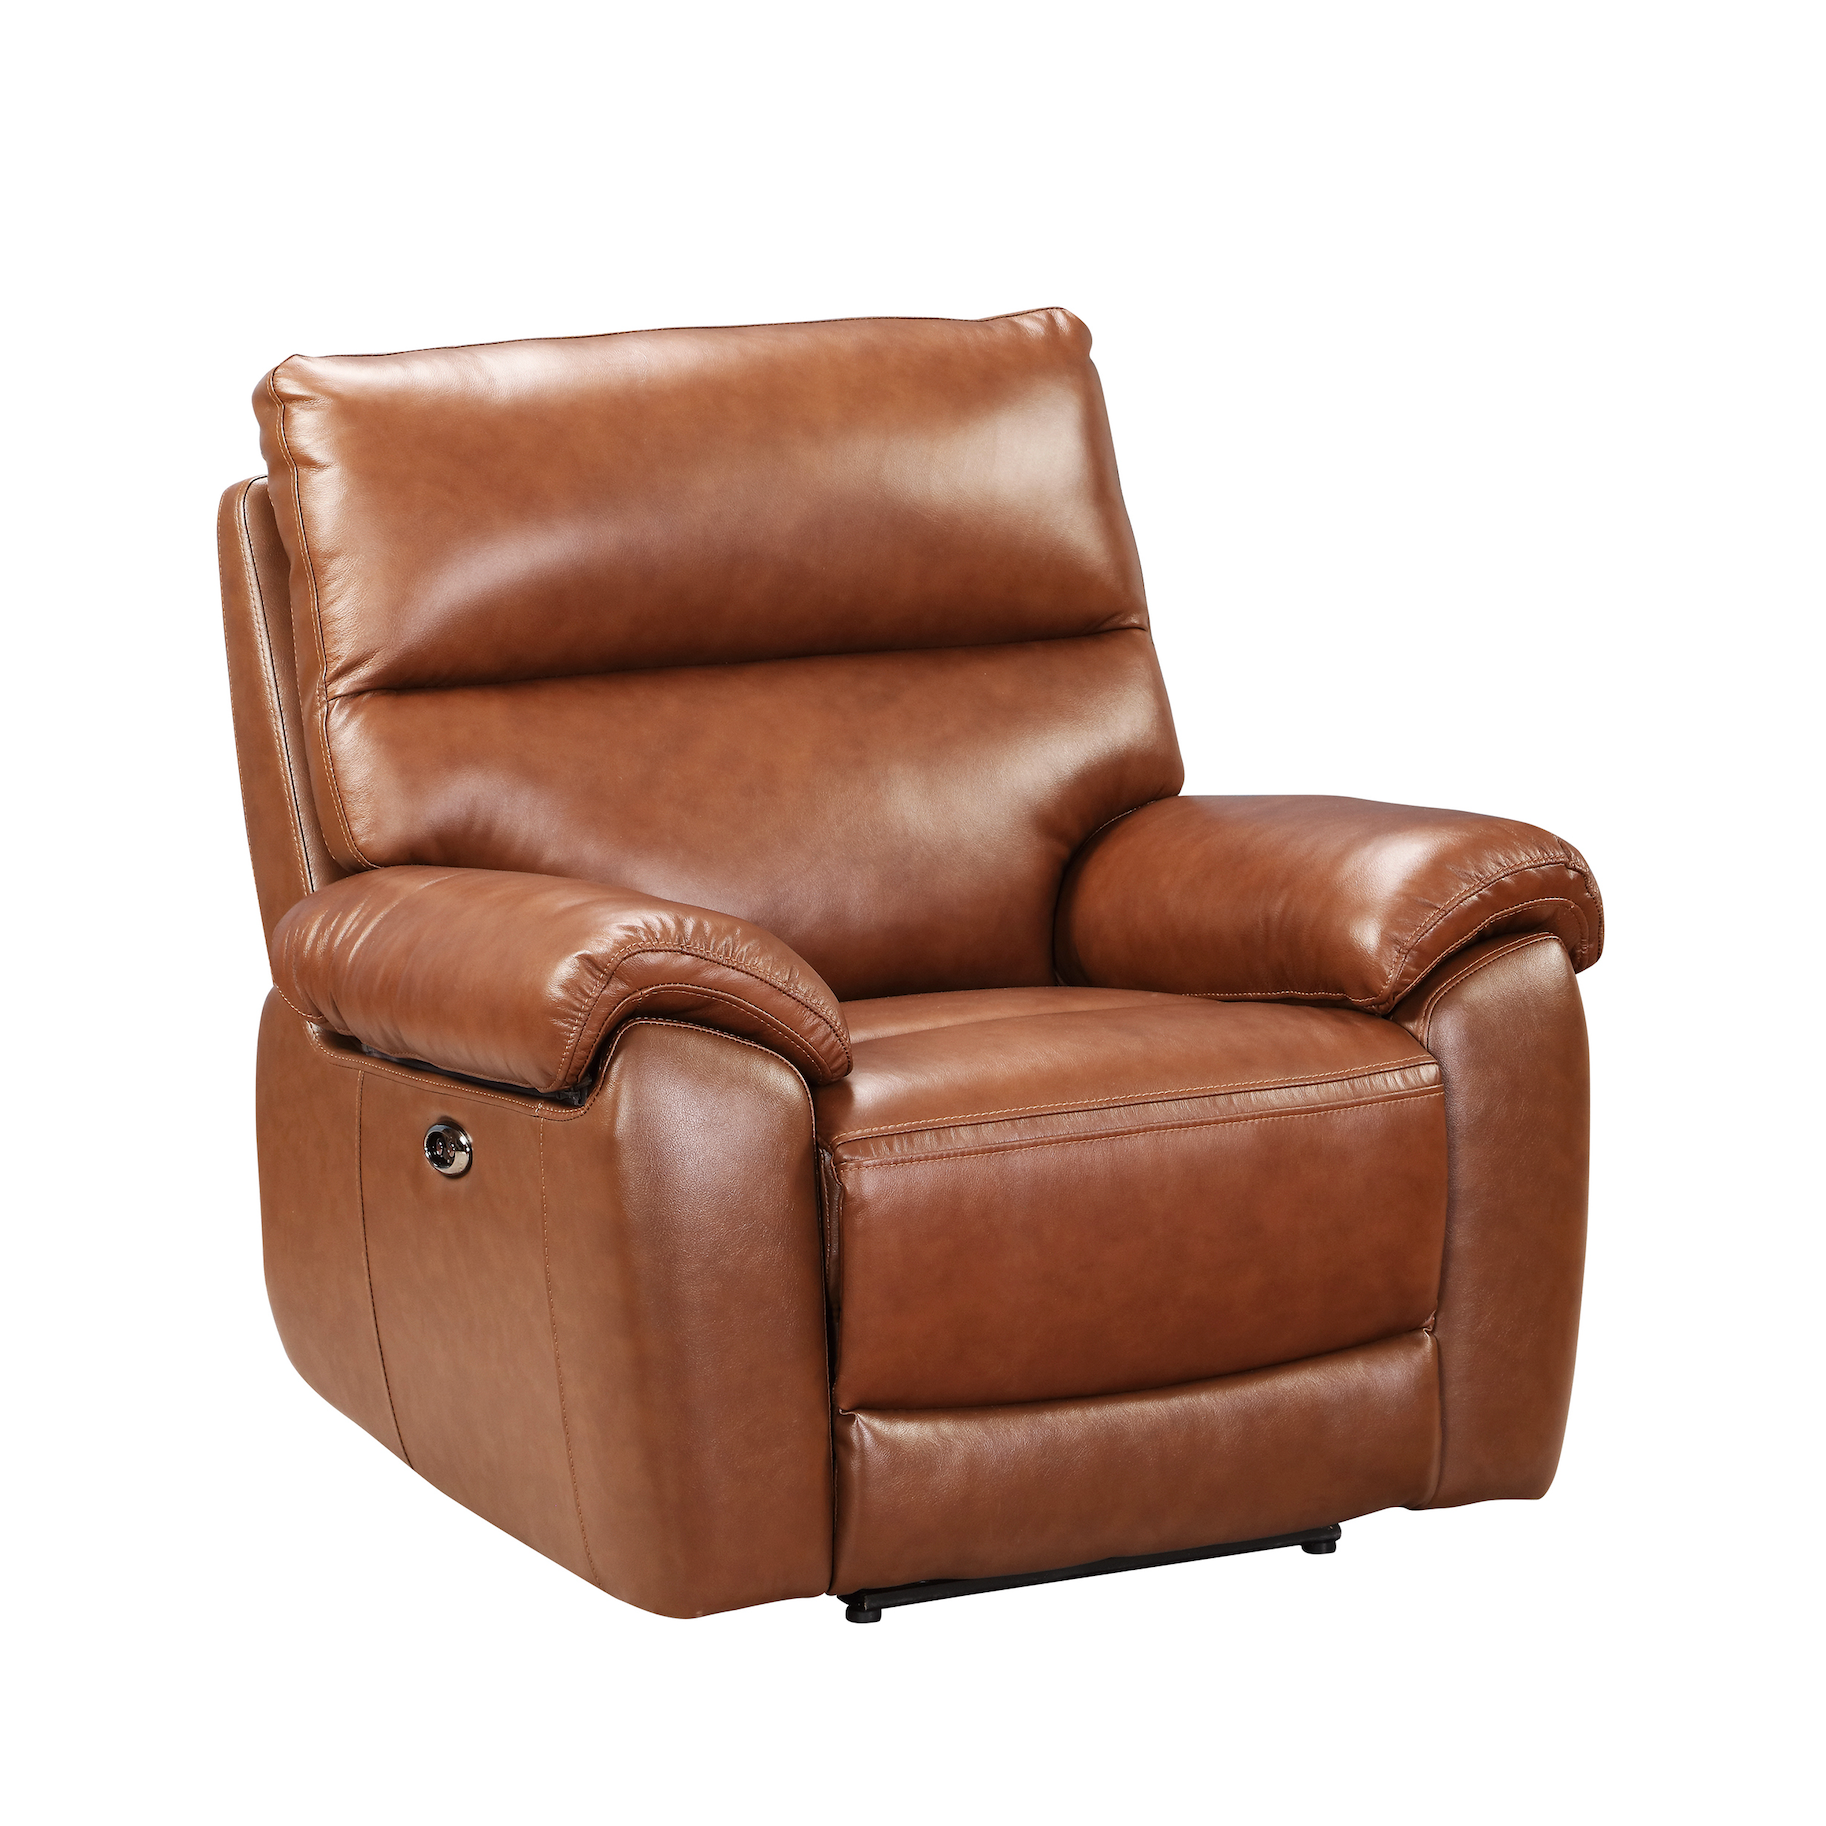 Rocco Power Recliner Chair Chestnut Leather